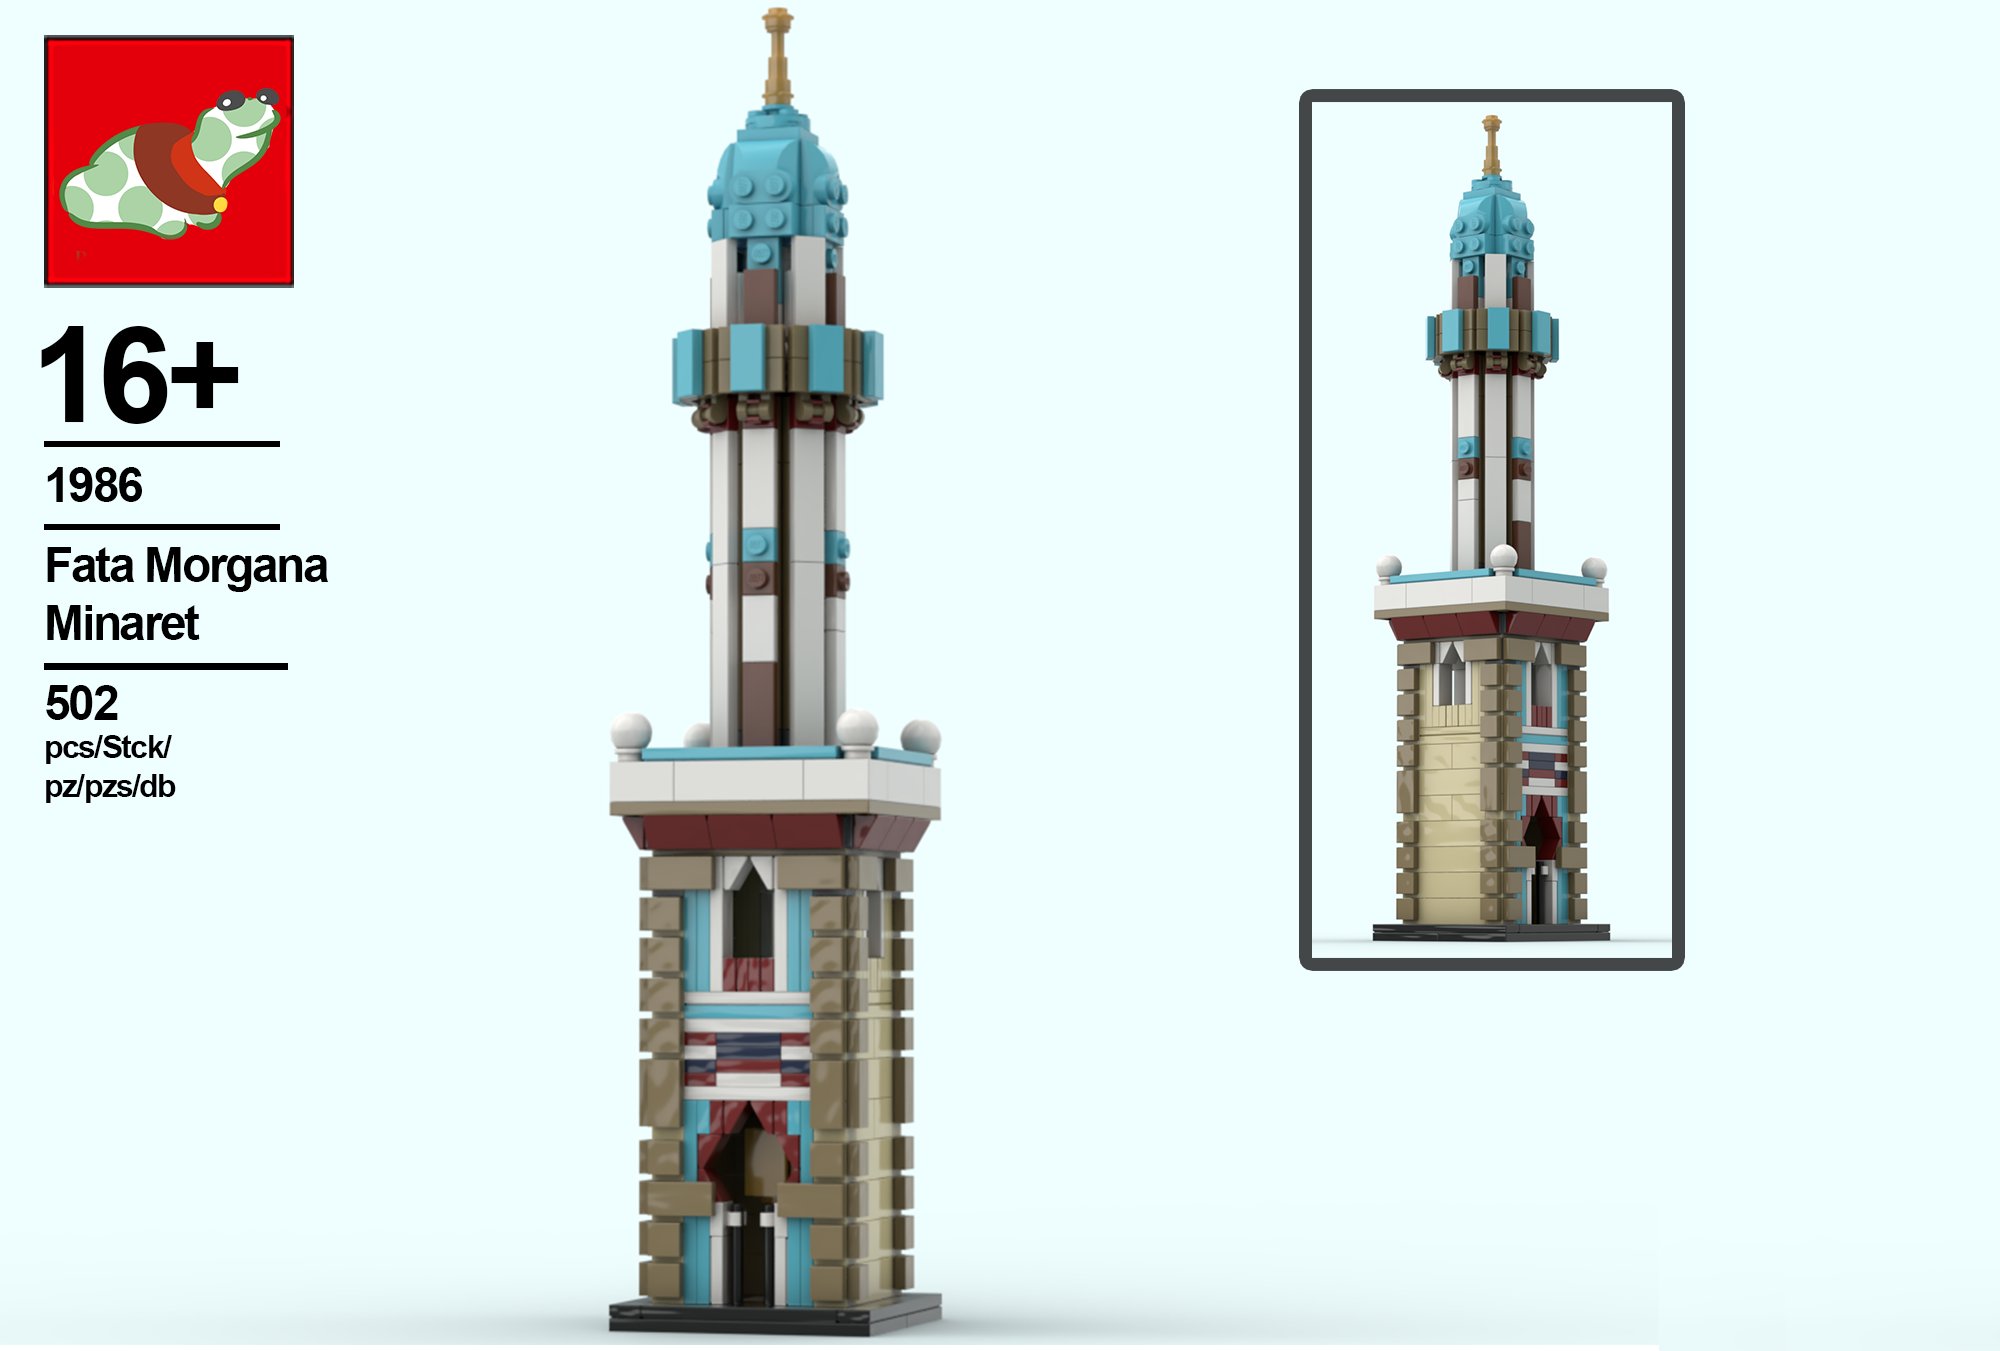 Tom on Twitter: last in this crazy Lego-filled week: Fata Morgana! Now available on my Etsy store :D https://t.co/rNcTcZh8Sr #Efteling #FataMorgana #Brickdekikker https://t.co/QQ7TFKUBJF" / Twitter